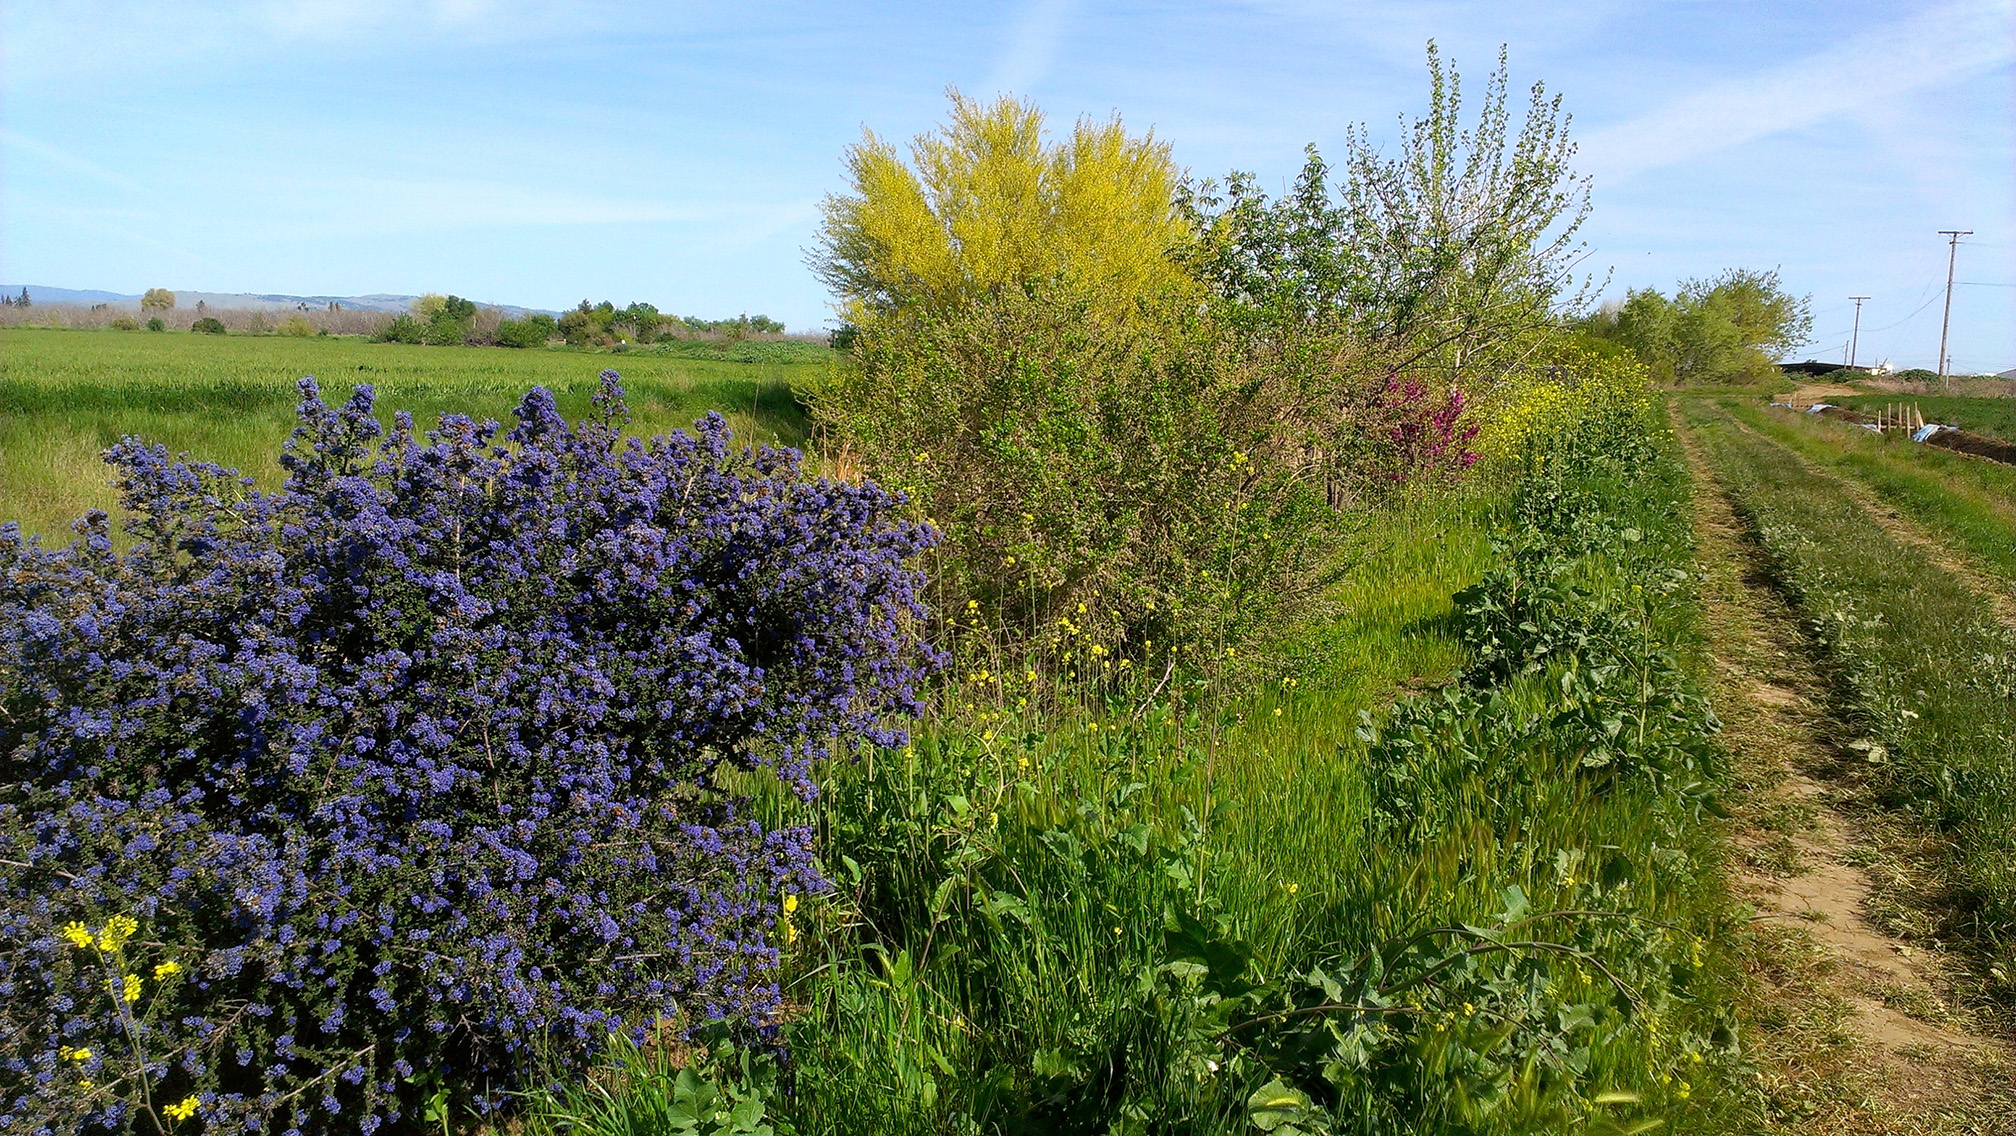 Dark blue flowers of ceonothus and the pink of red bud light up this hedgerow planted along a farm track.